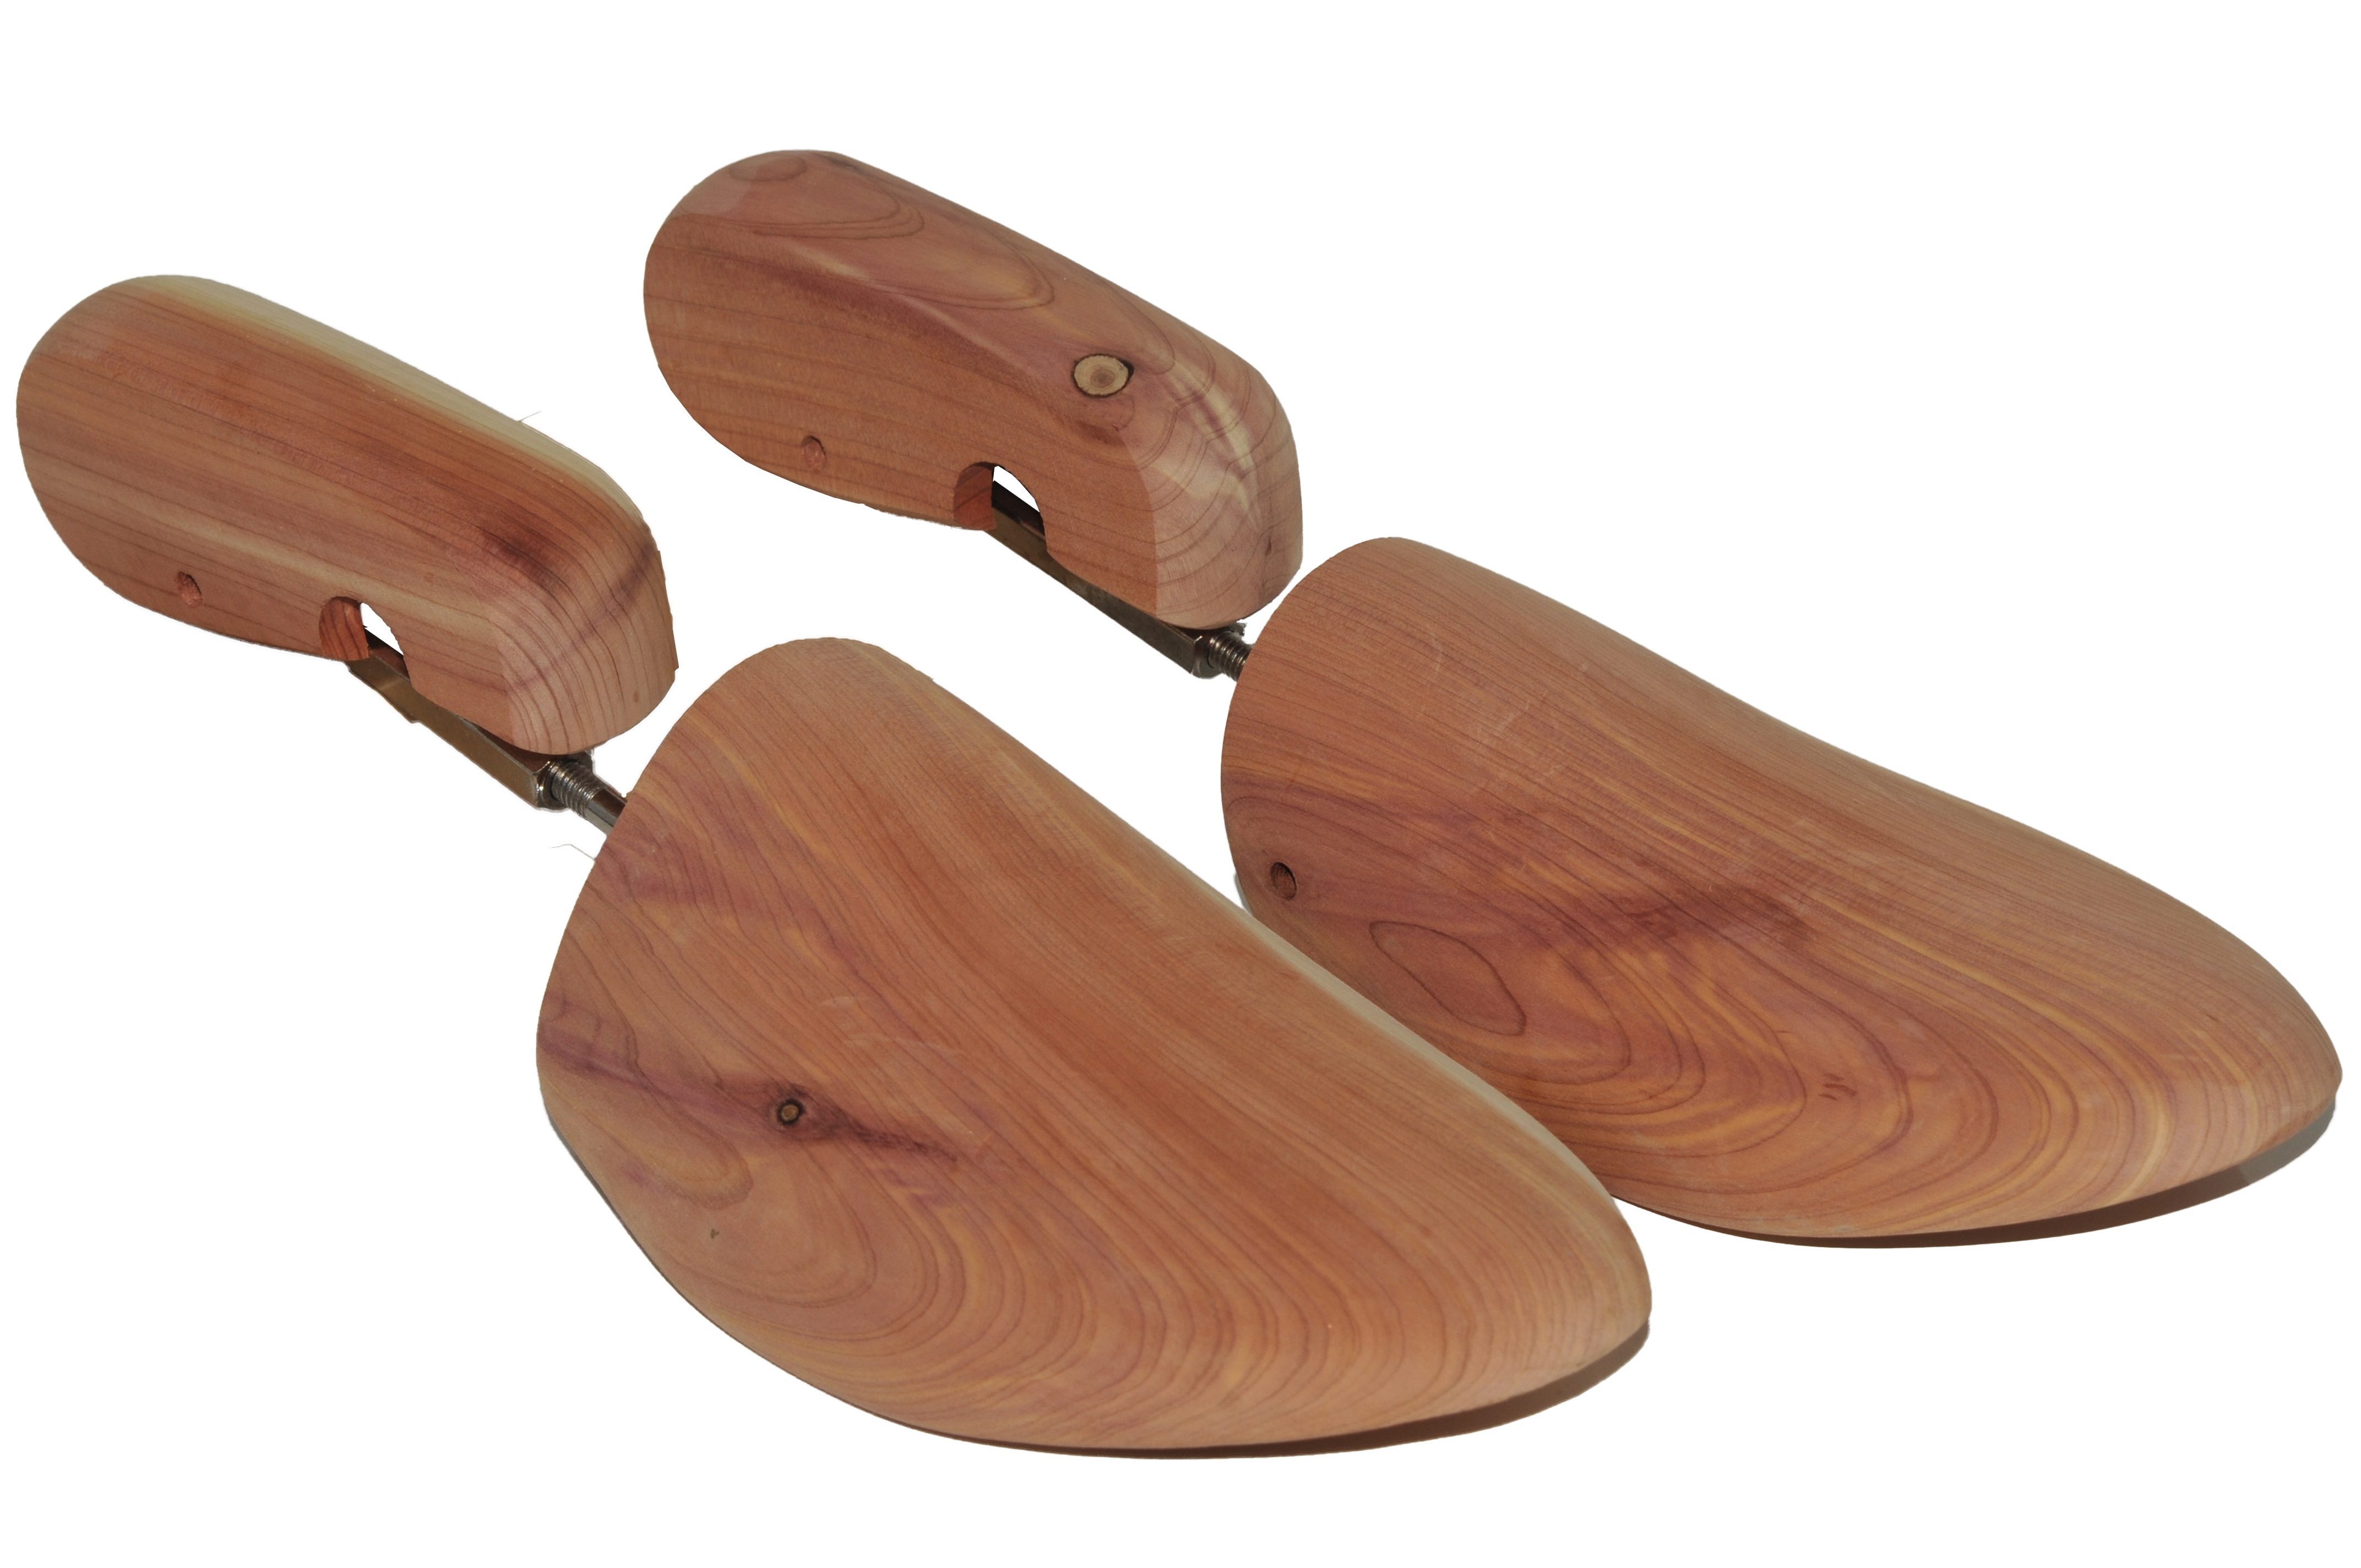 Shoe tree style Basic in aromatic Red Ceder wood, the classic.